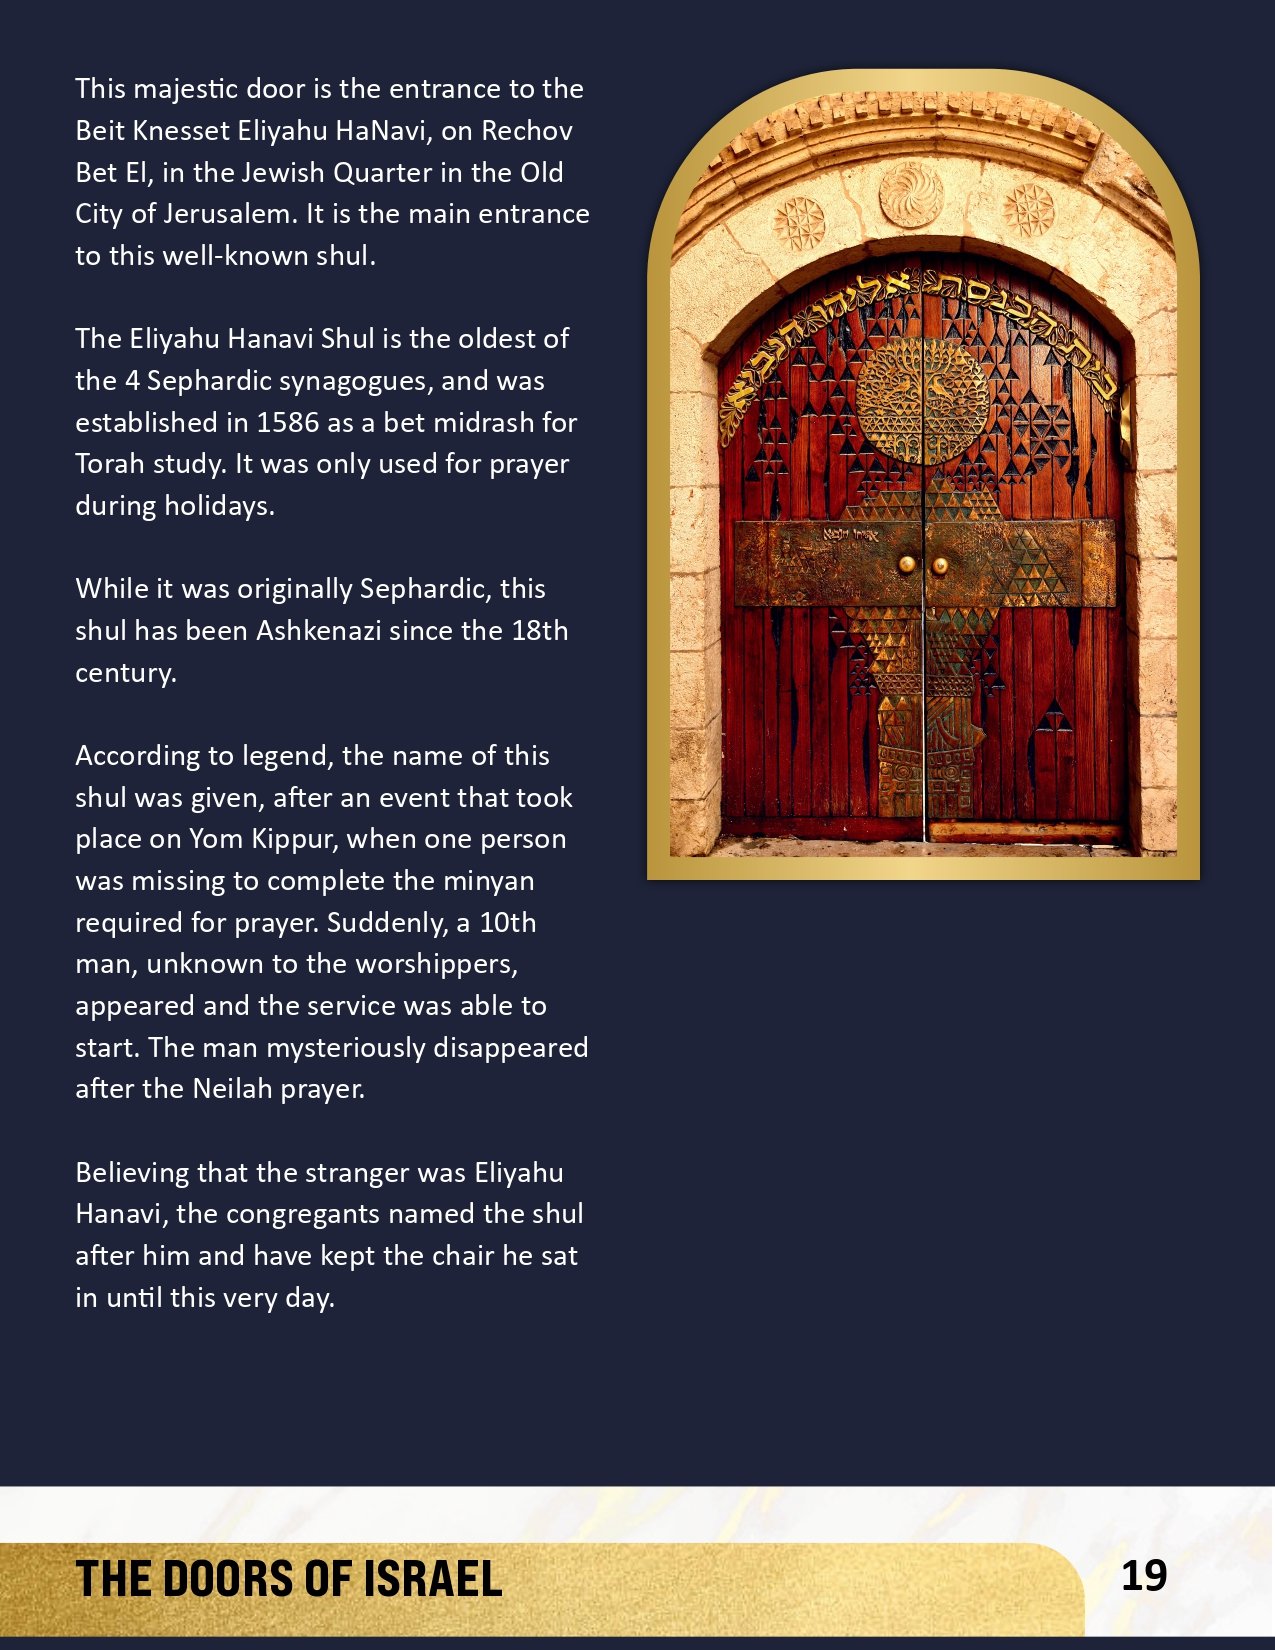 THE DOORS OF ISRAEL-6 INSIDE TEXT-19_page-0001.jpg